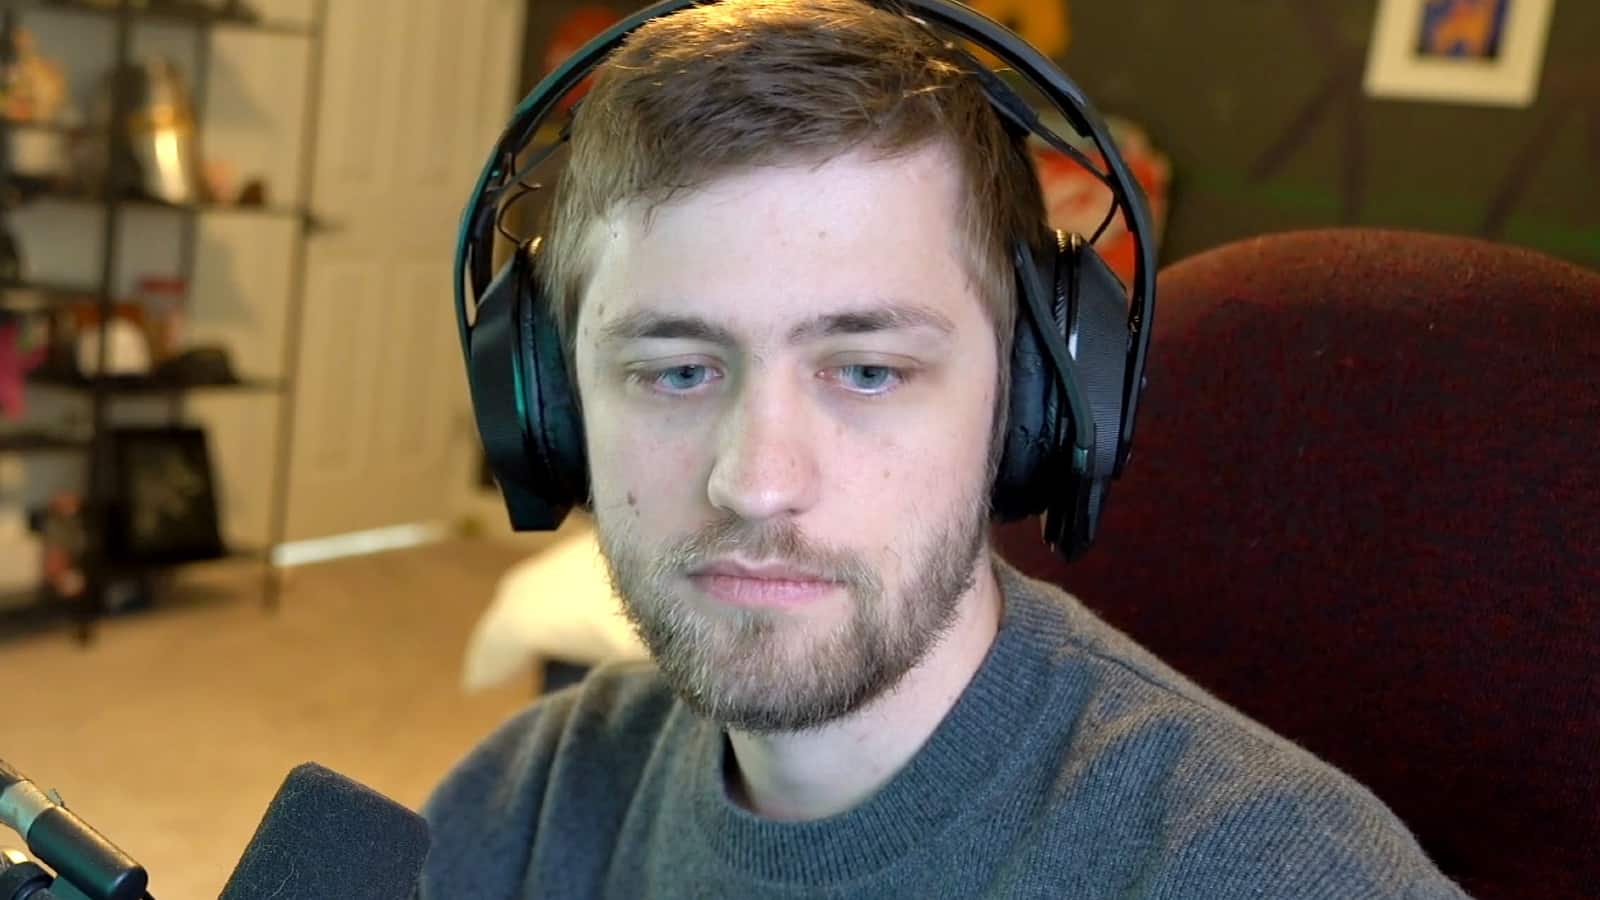 Sodapoppin streaming on Twitch